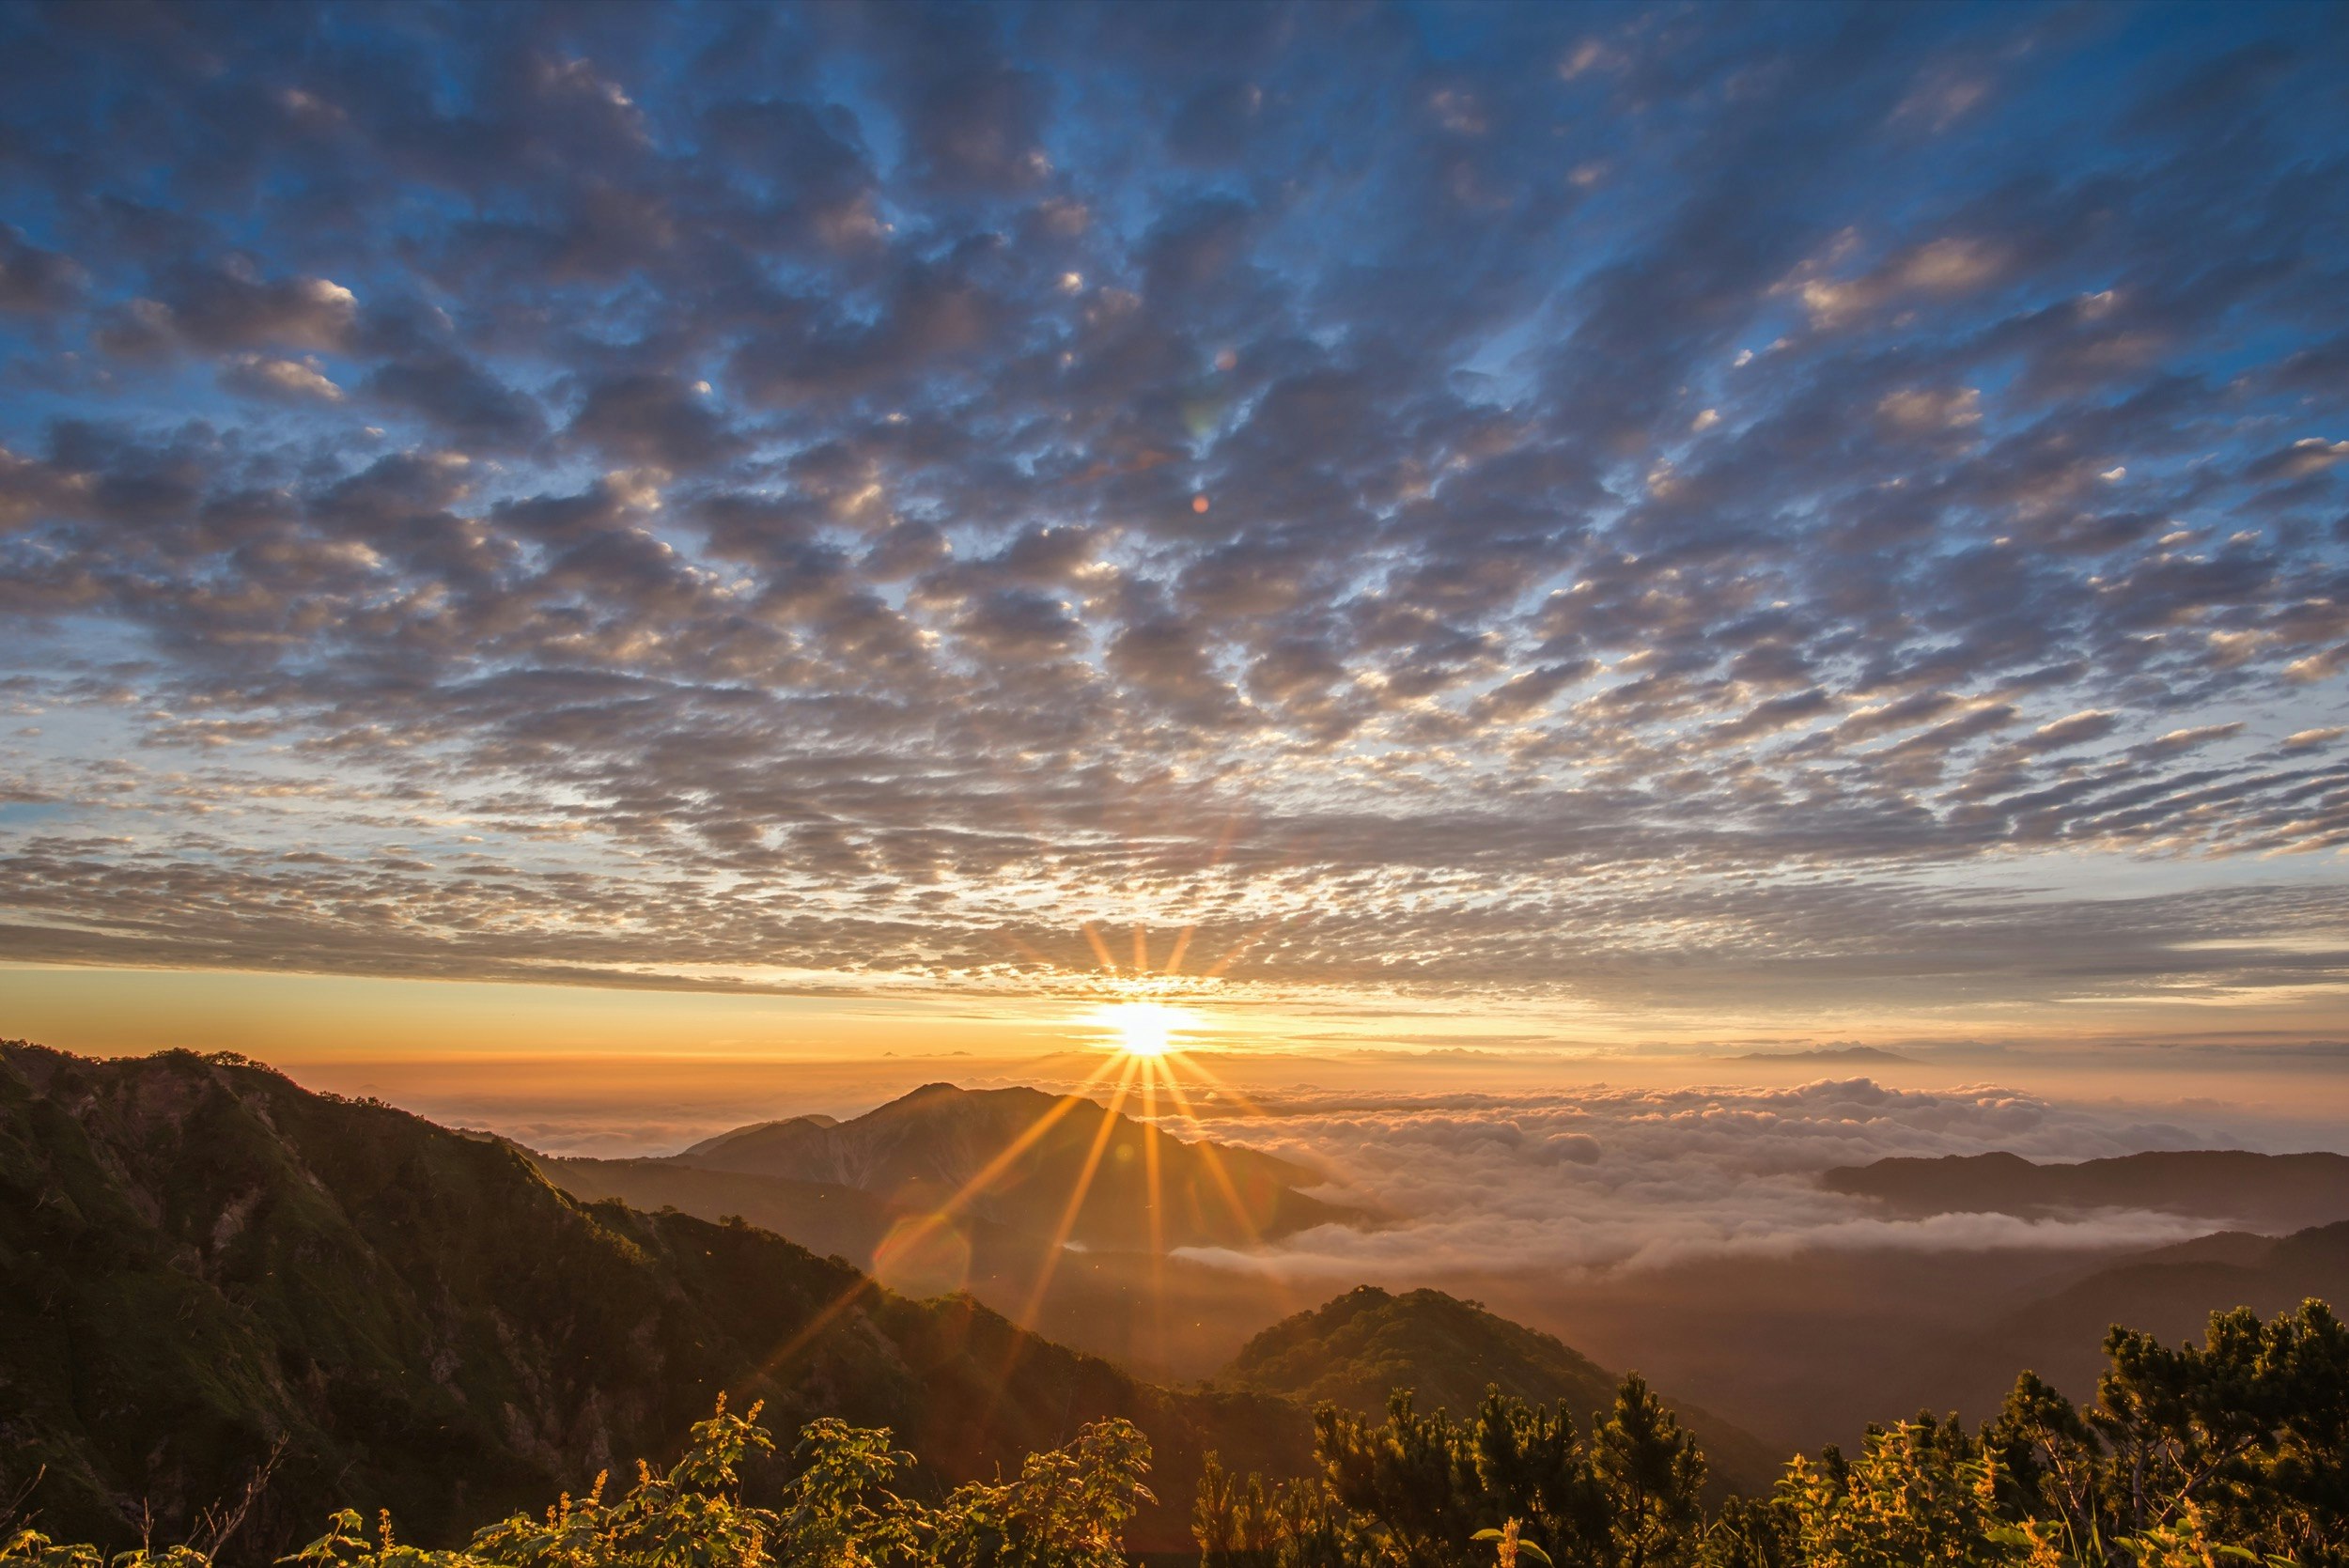 Mt.Hakusan; Shutterstock ID 656938516; Your name (First / Last): Ben N Buckner; GL account no.: 65050; Netsuite department name: Online Editorial; Full Product or Project name including edition: Gifu Ishikawa Trekking